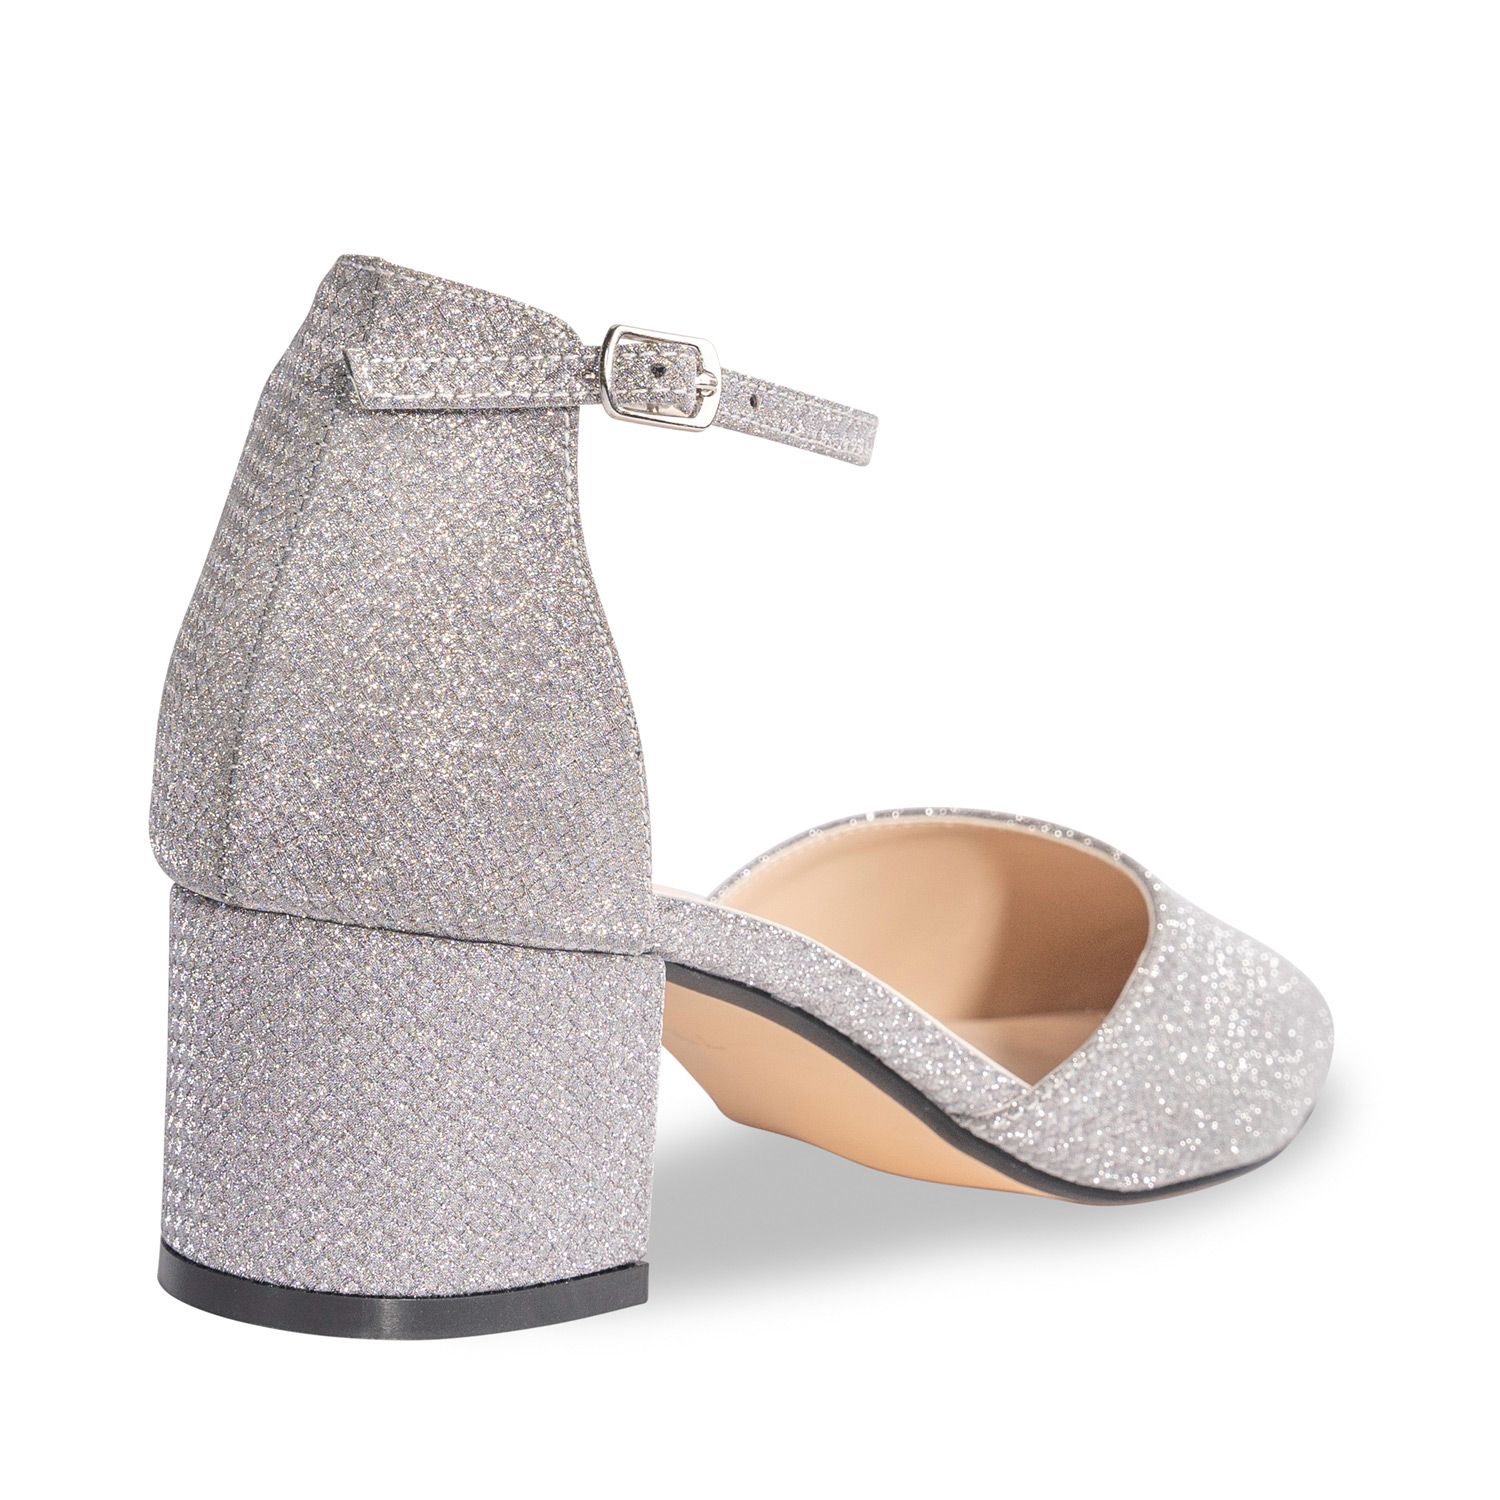 Right angle view of Closed toe shimmer shoe with 1.75 inch block heel